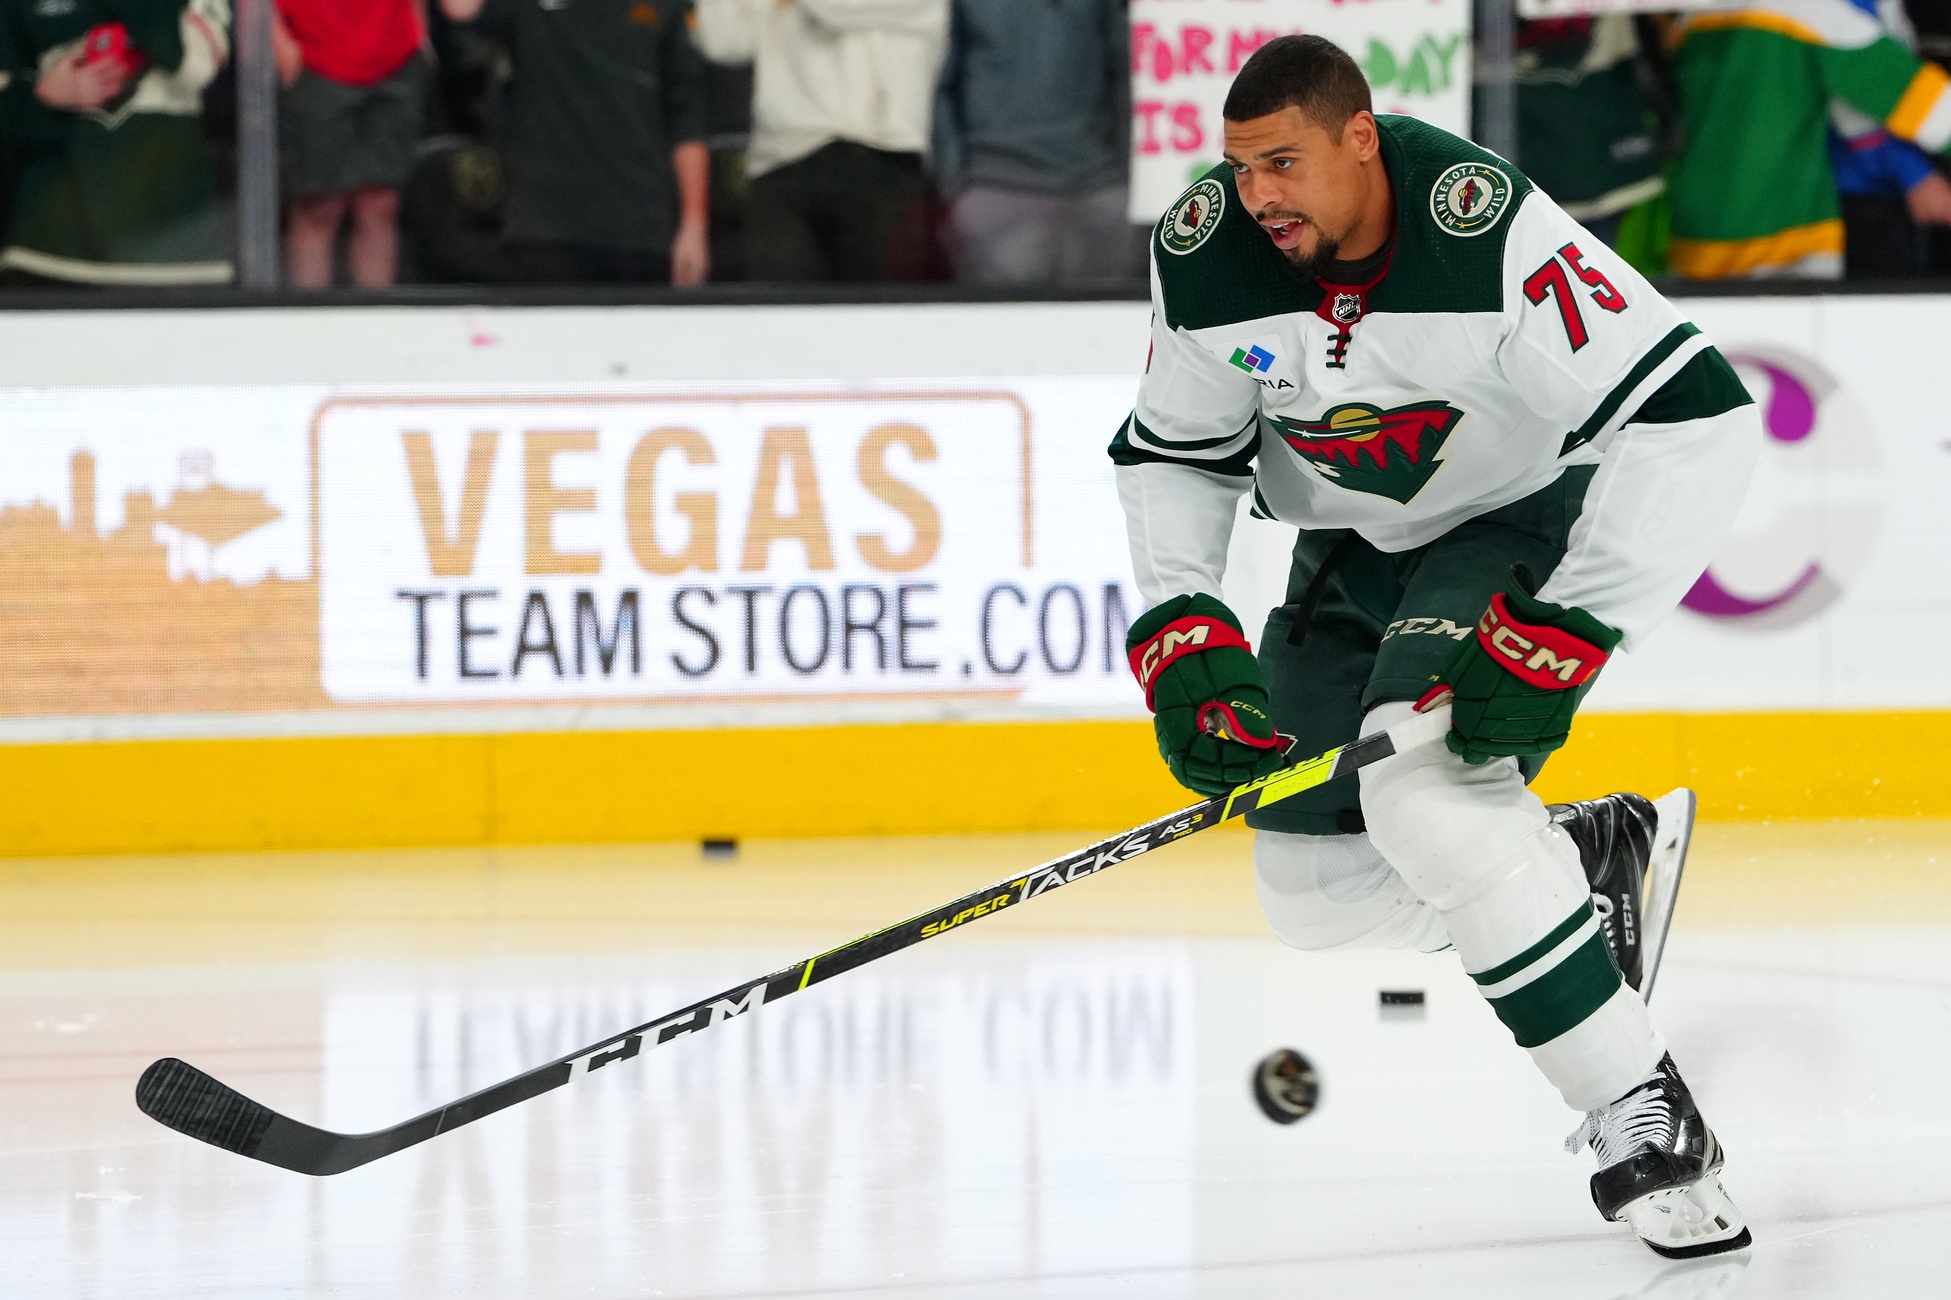 Ryan Reaves, Wild have mutual interest in contract extension